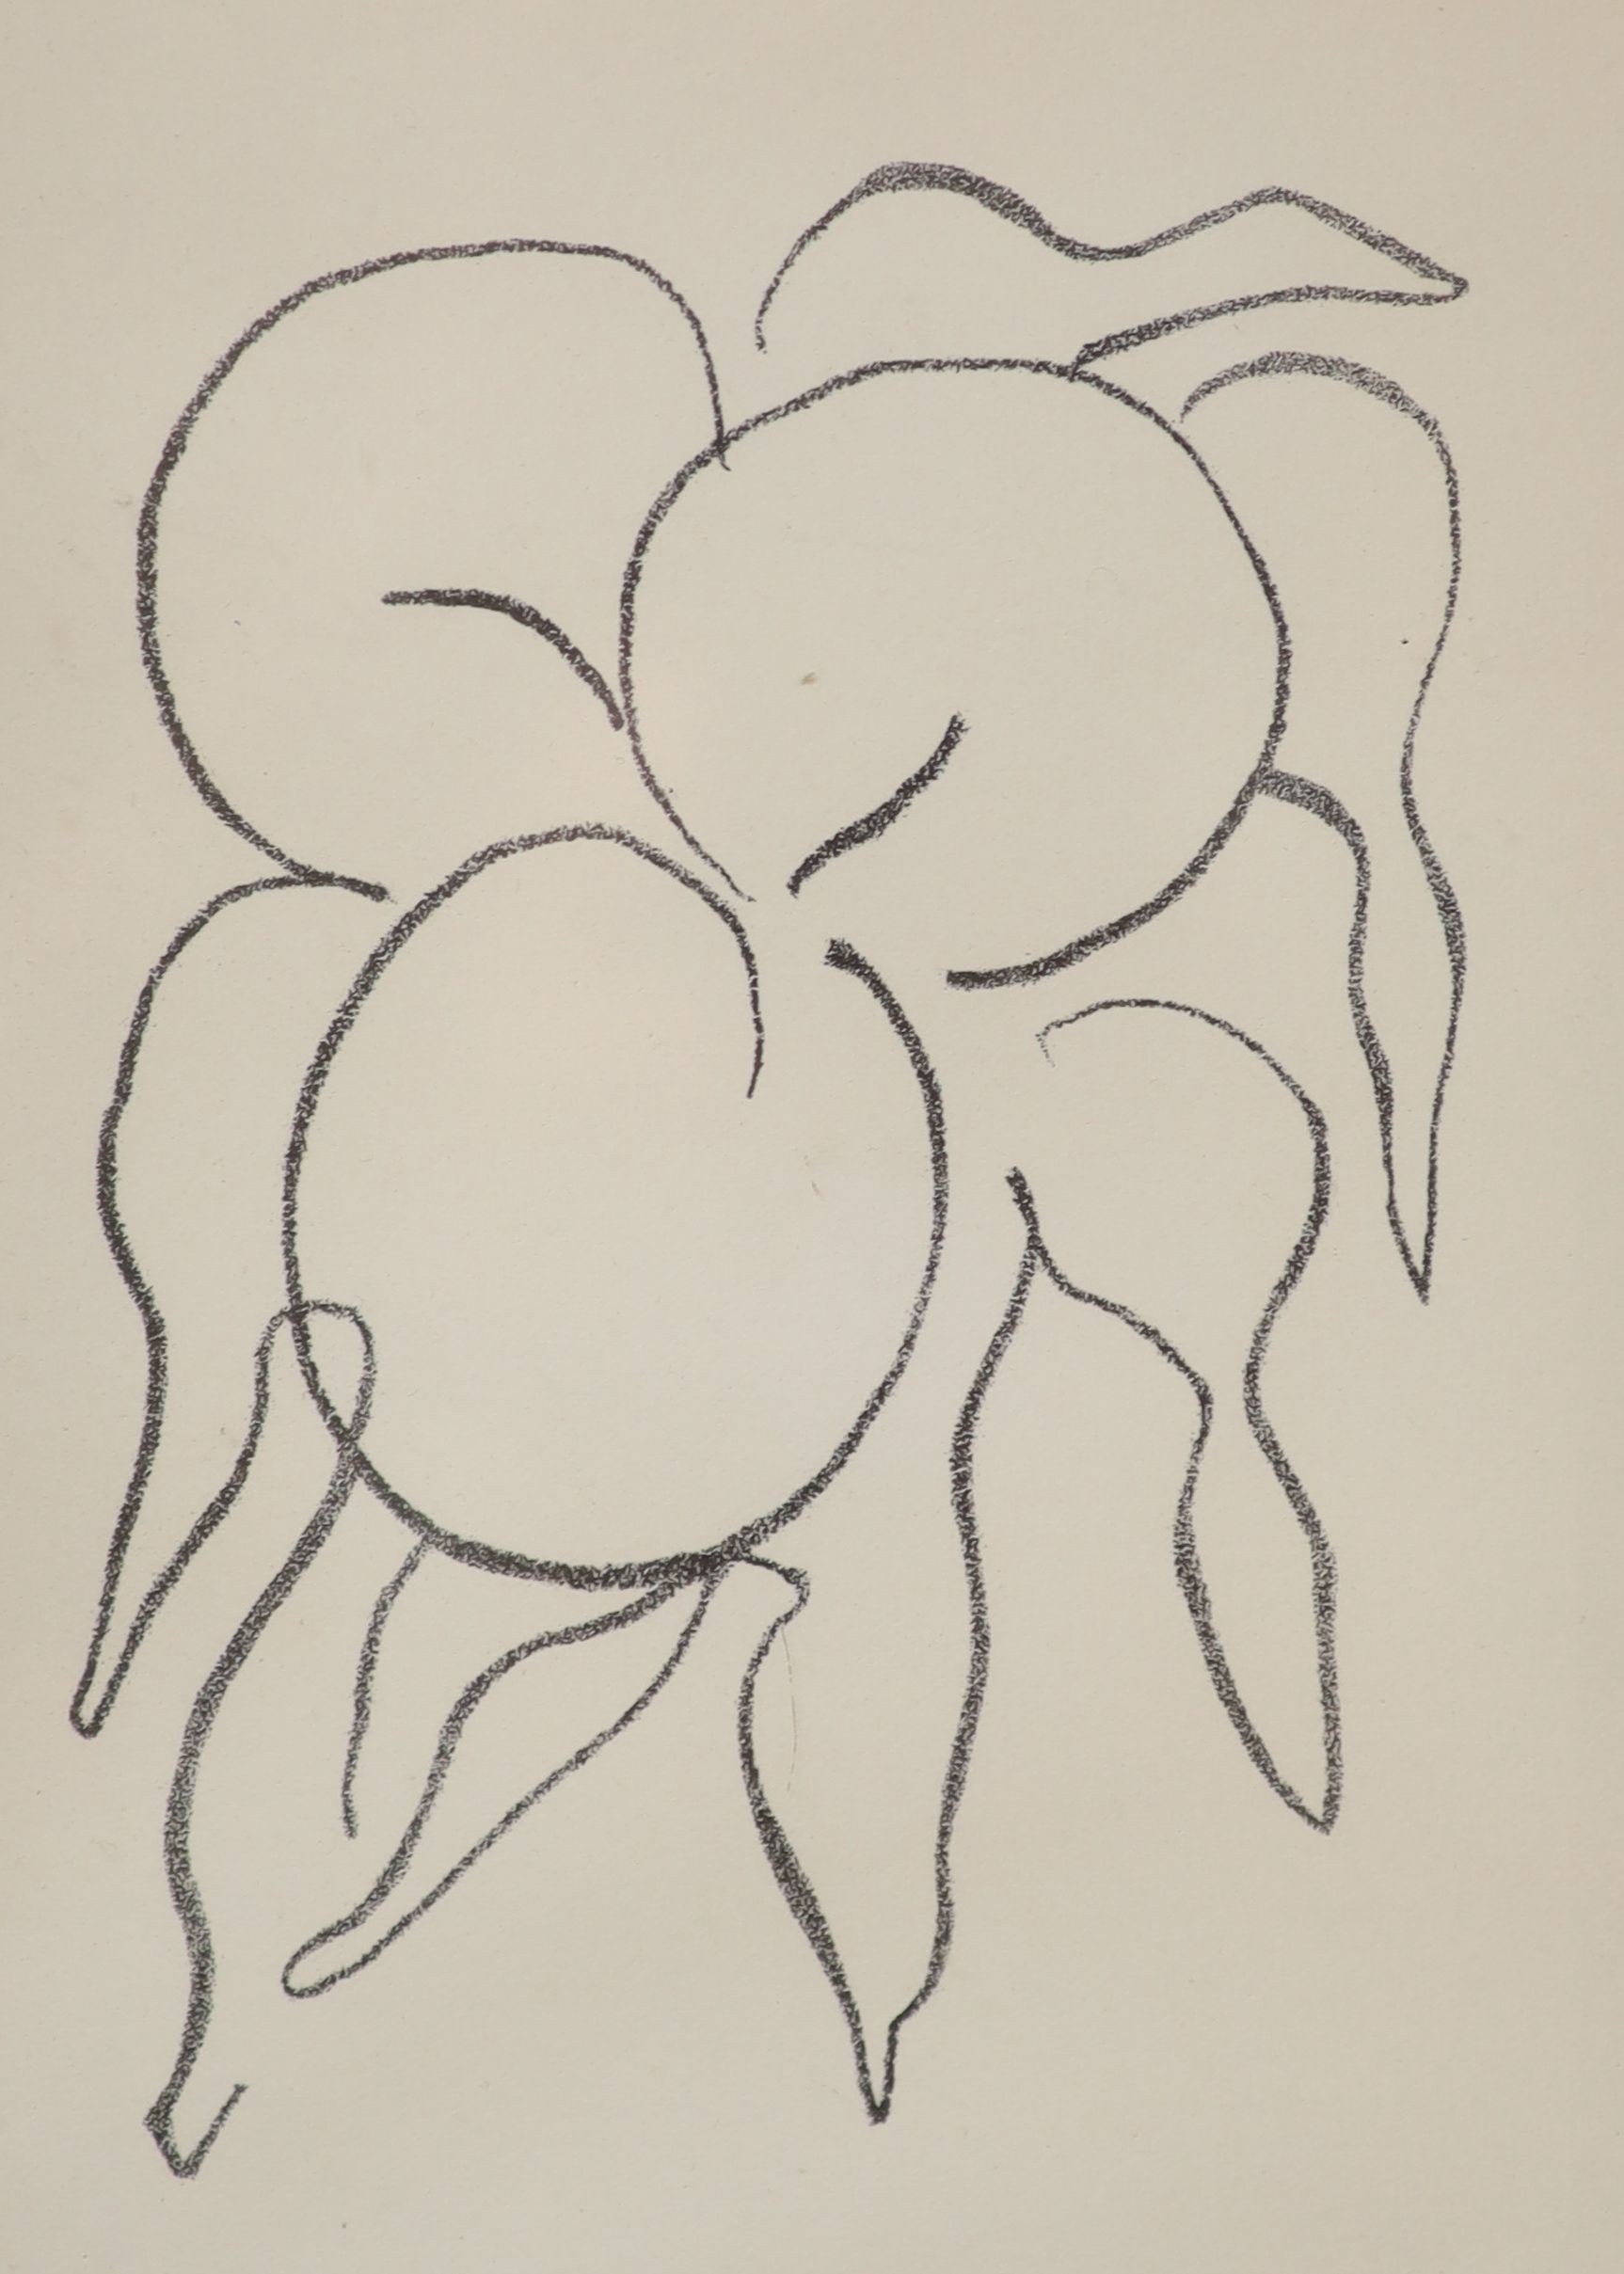 Henri Matisse (1869-1954), lithograph, 'Fruit' 1965, printed by Mourlot for the Redfern Gallery, 18 x 13cm